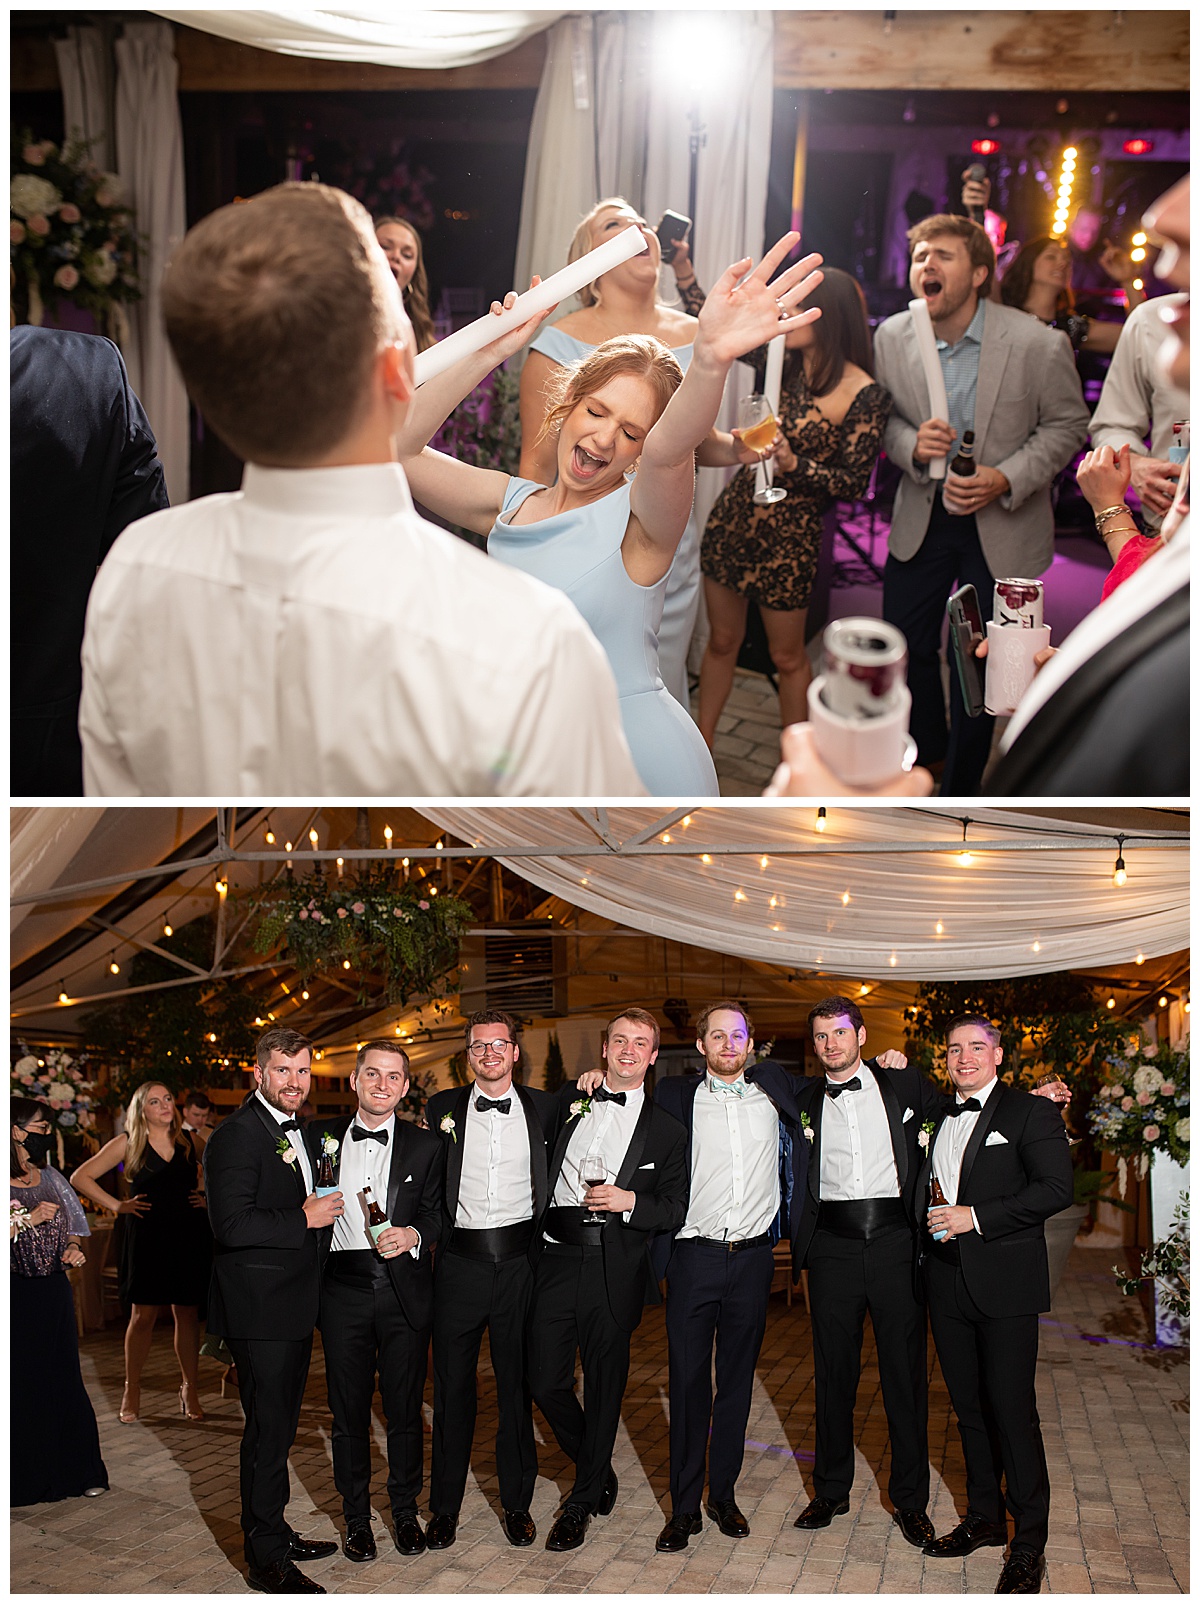 bridesmaid dancing at reception and groom with groomsmen